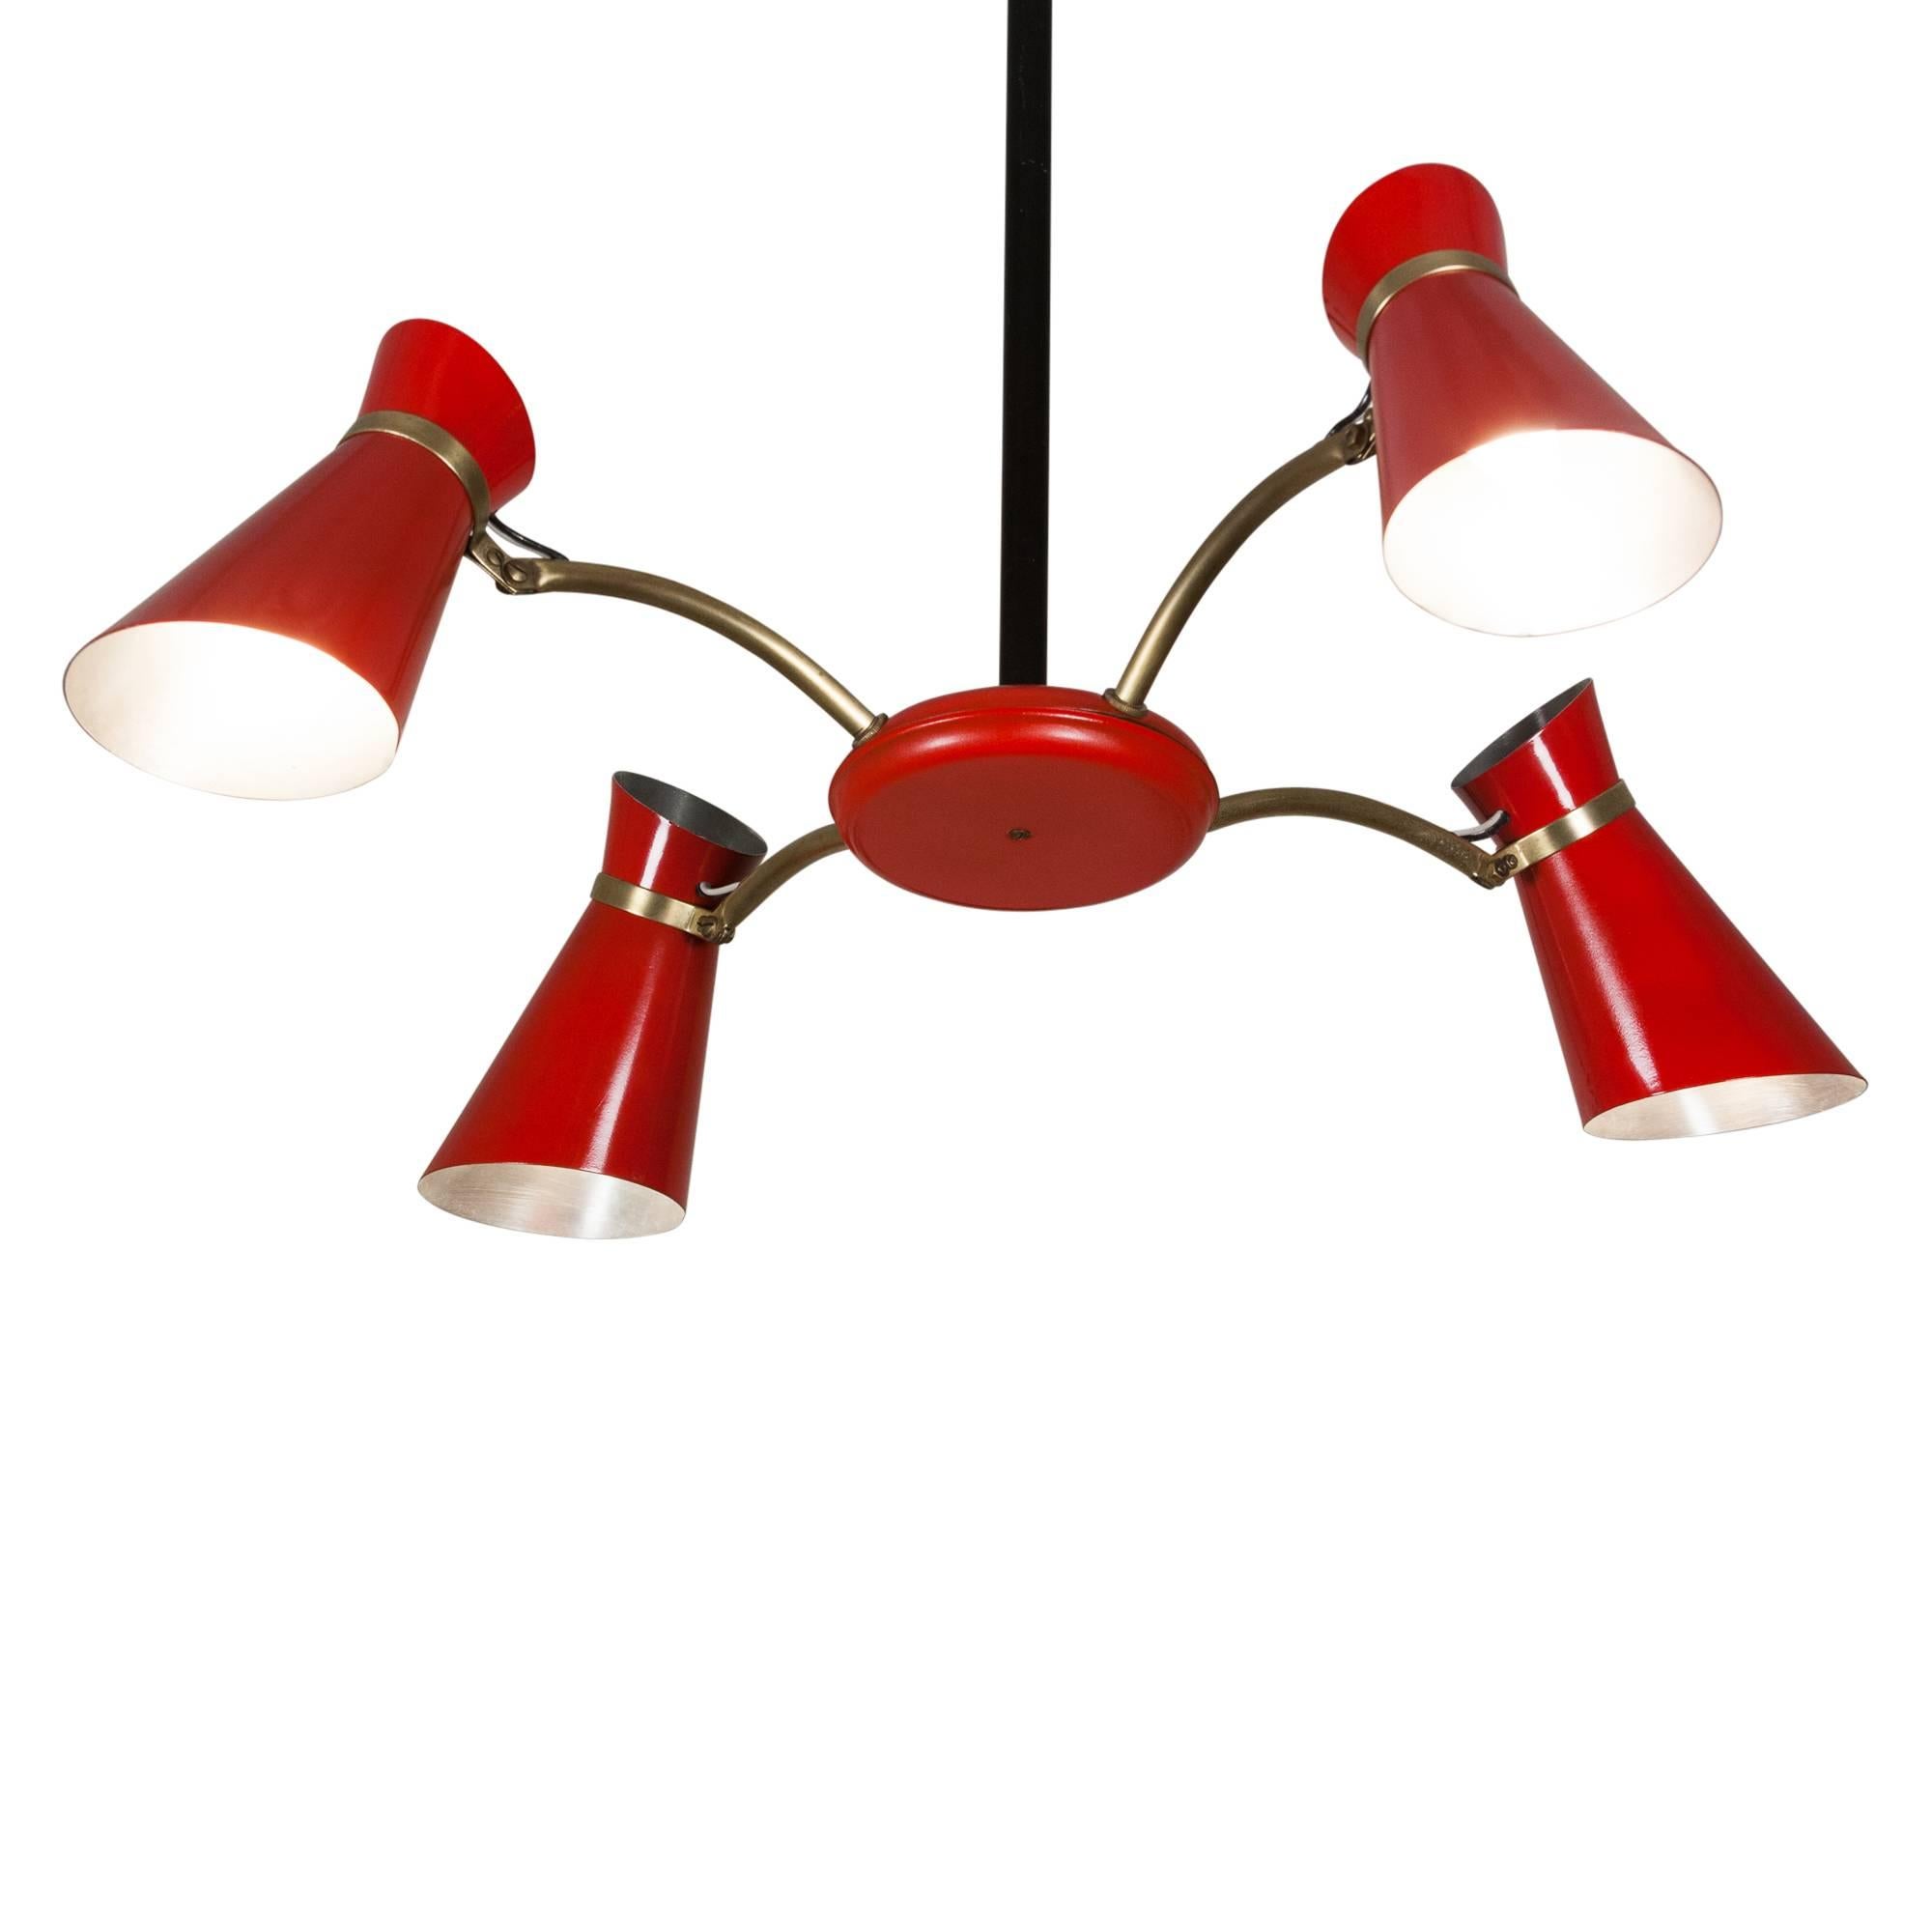 Mid-20th Century Red Lacquered Four-Arm Chandelier, French, 1950s For Sale